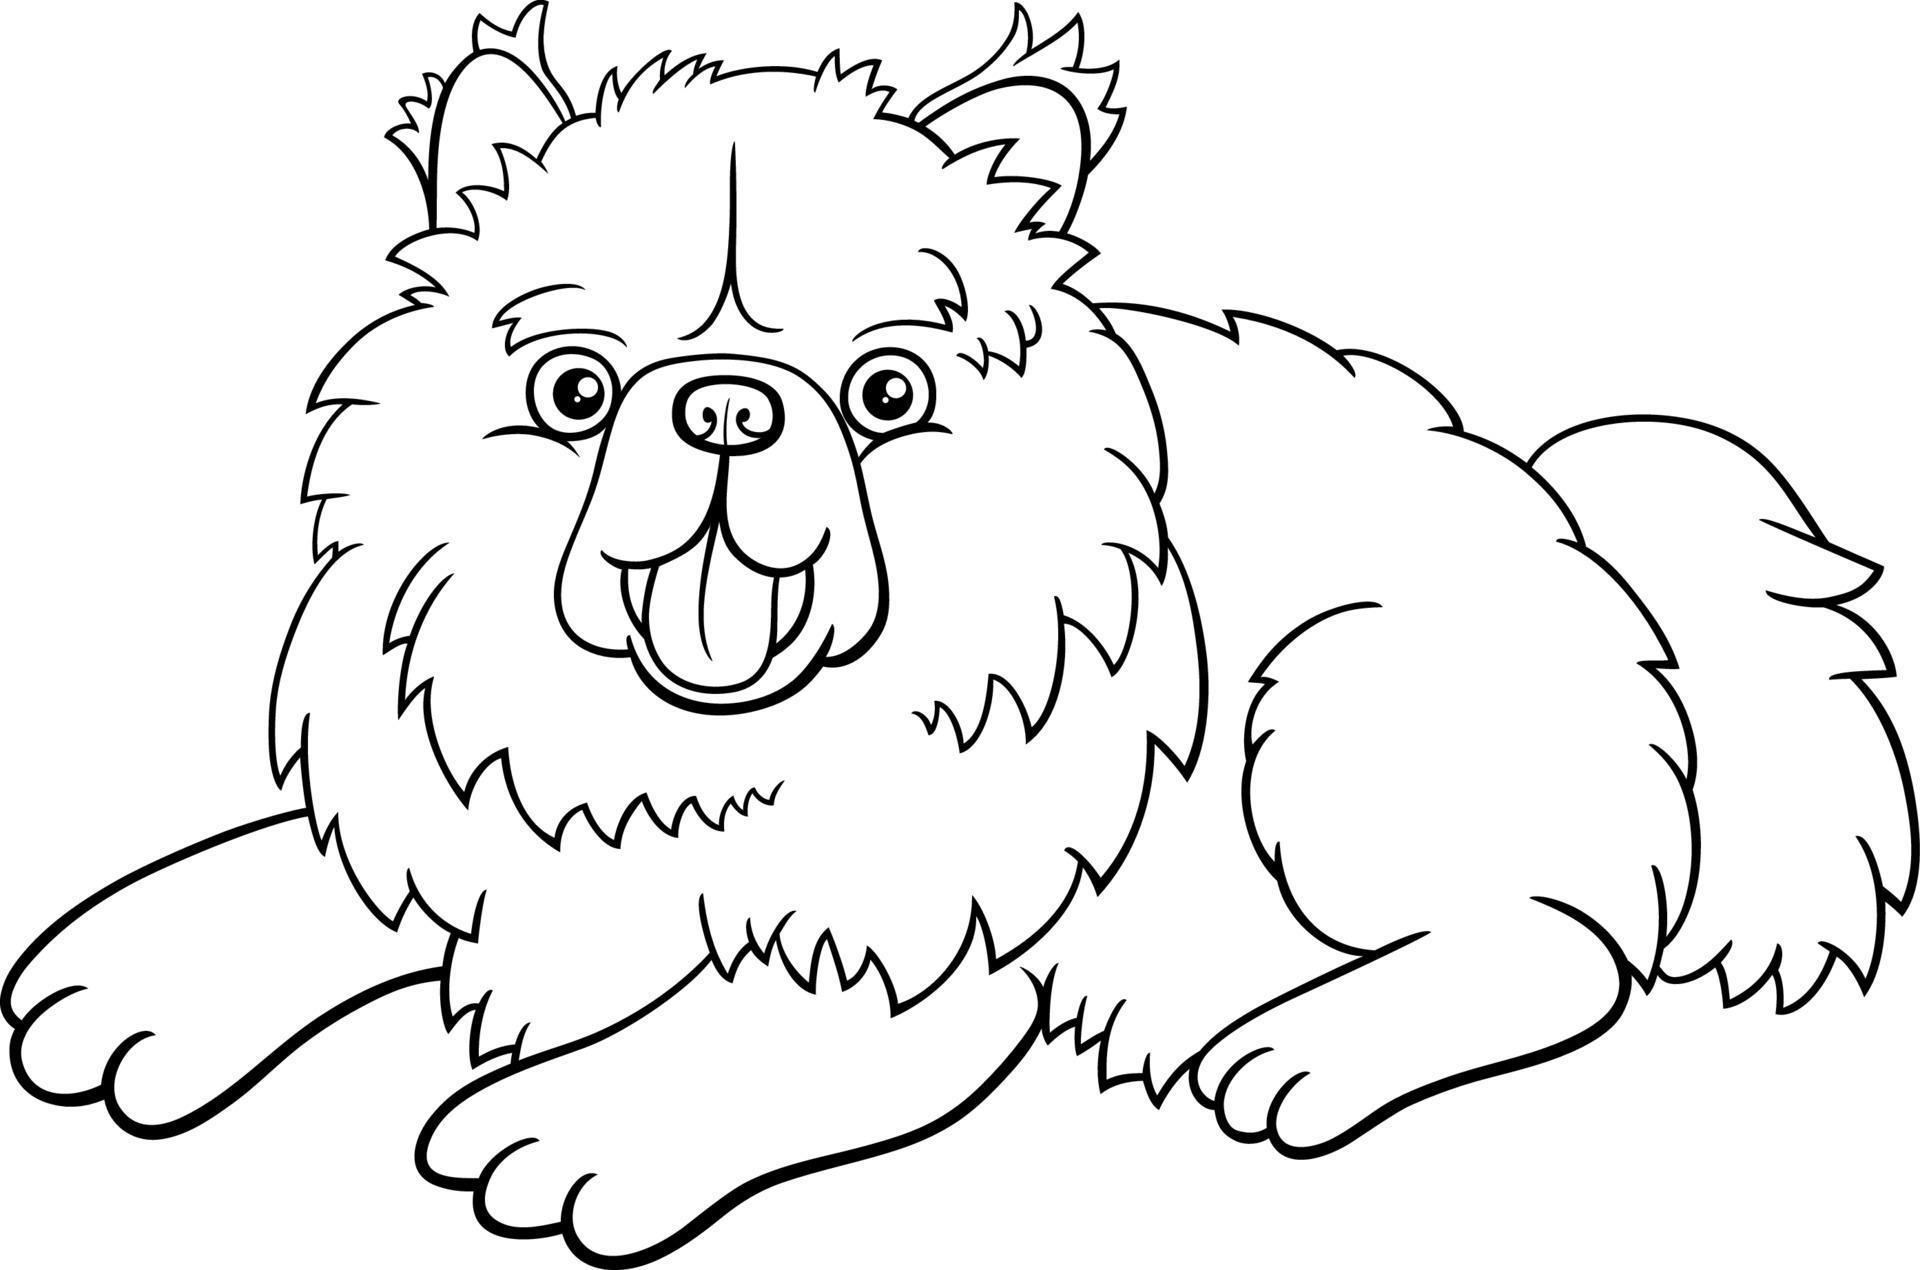 cartoon purebred chow chow dog coloring book page 5168722